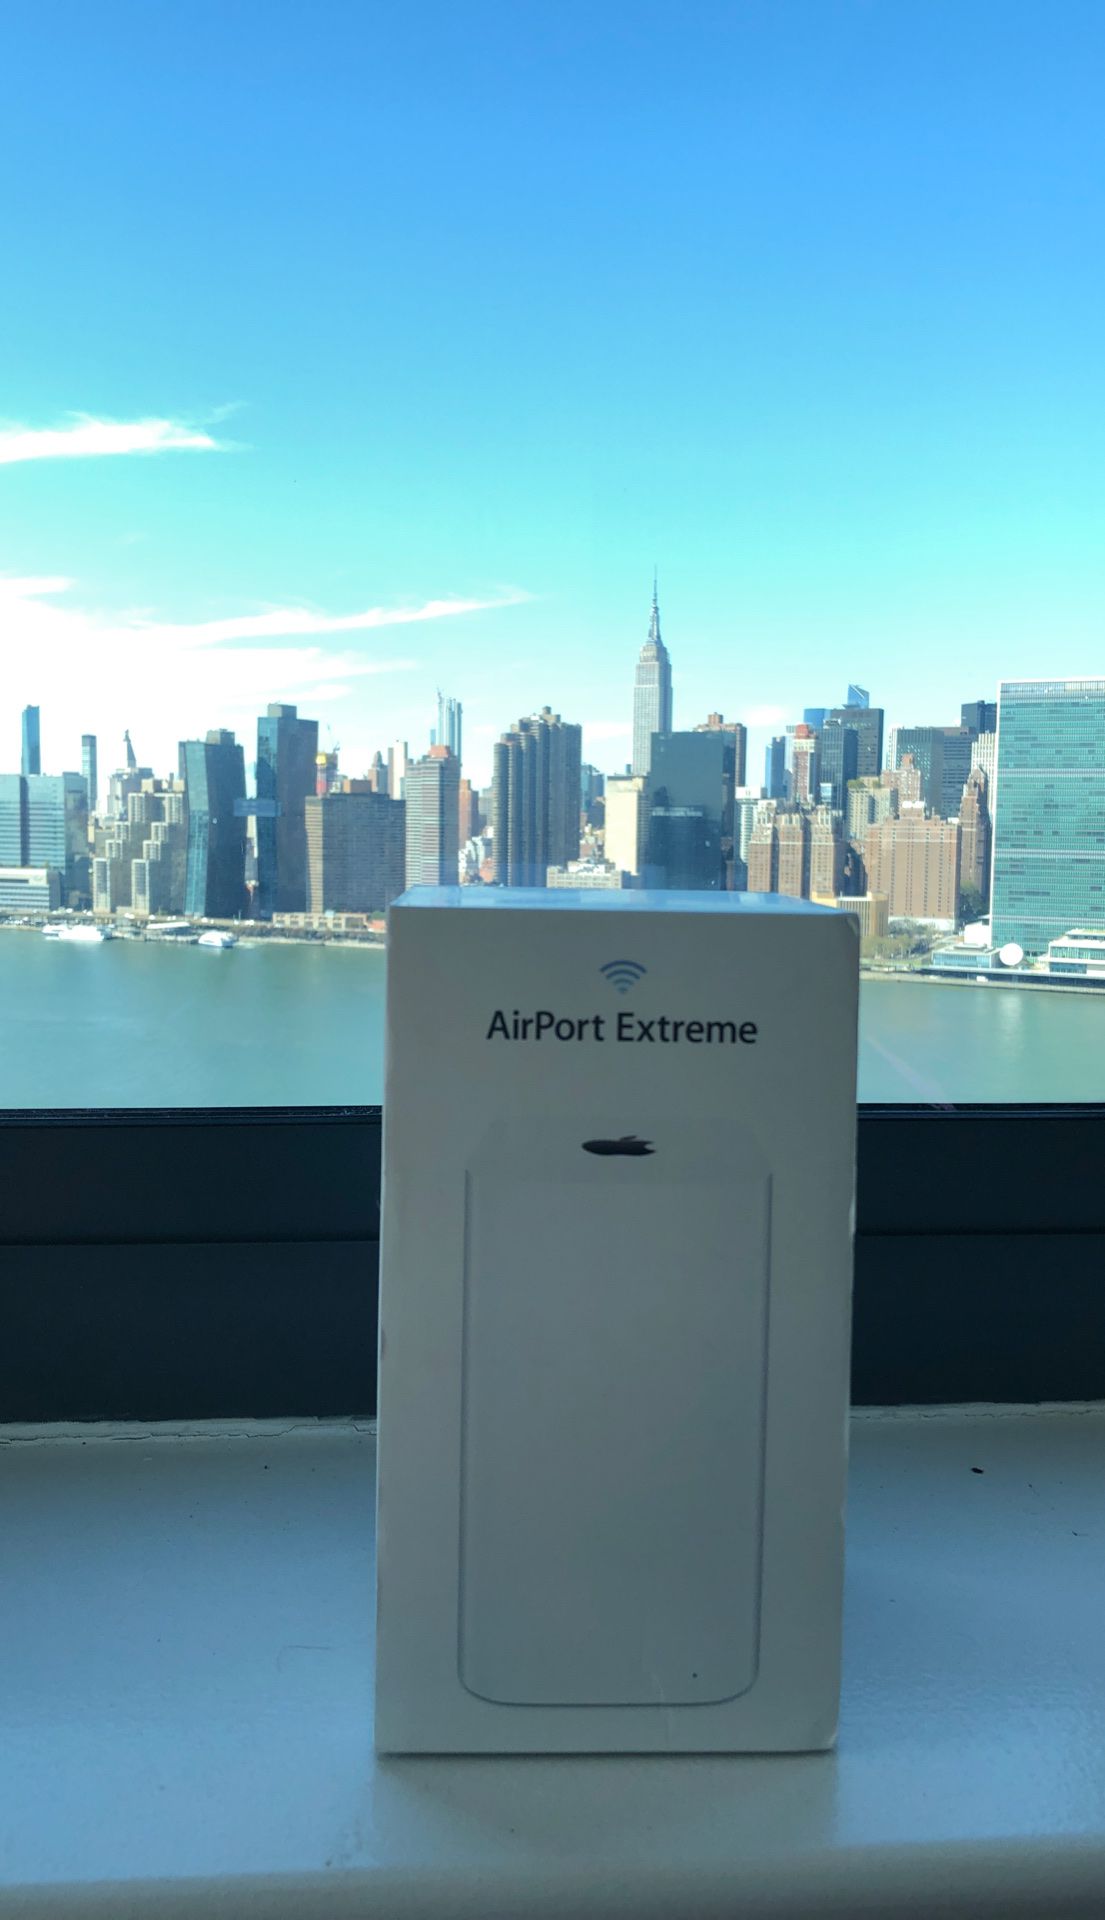 APPLE AIRPORT EXTREME Router A1521 3-PORT GIGABIT WIFI 802.11 AC ROUTER 6th Gen Comes in Original Box with Power Cord & Manual